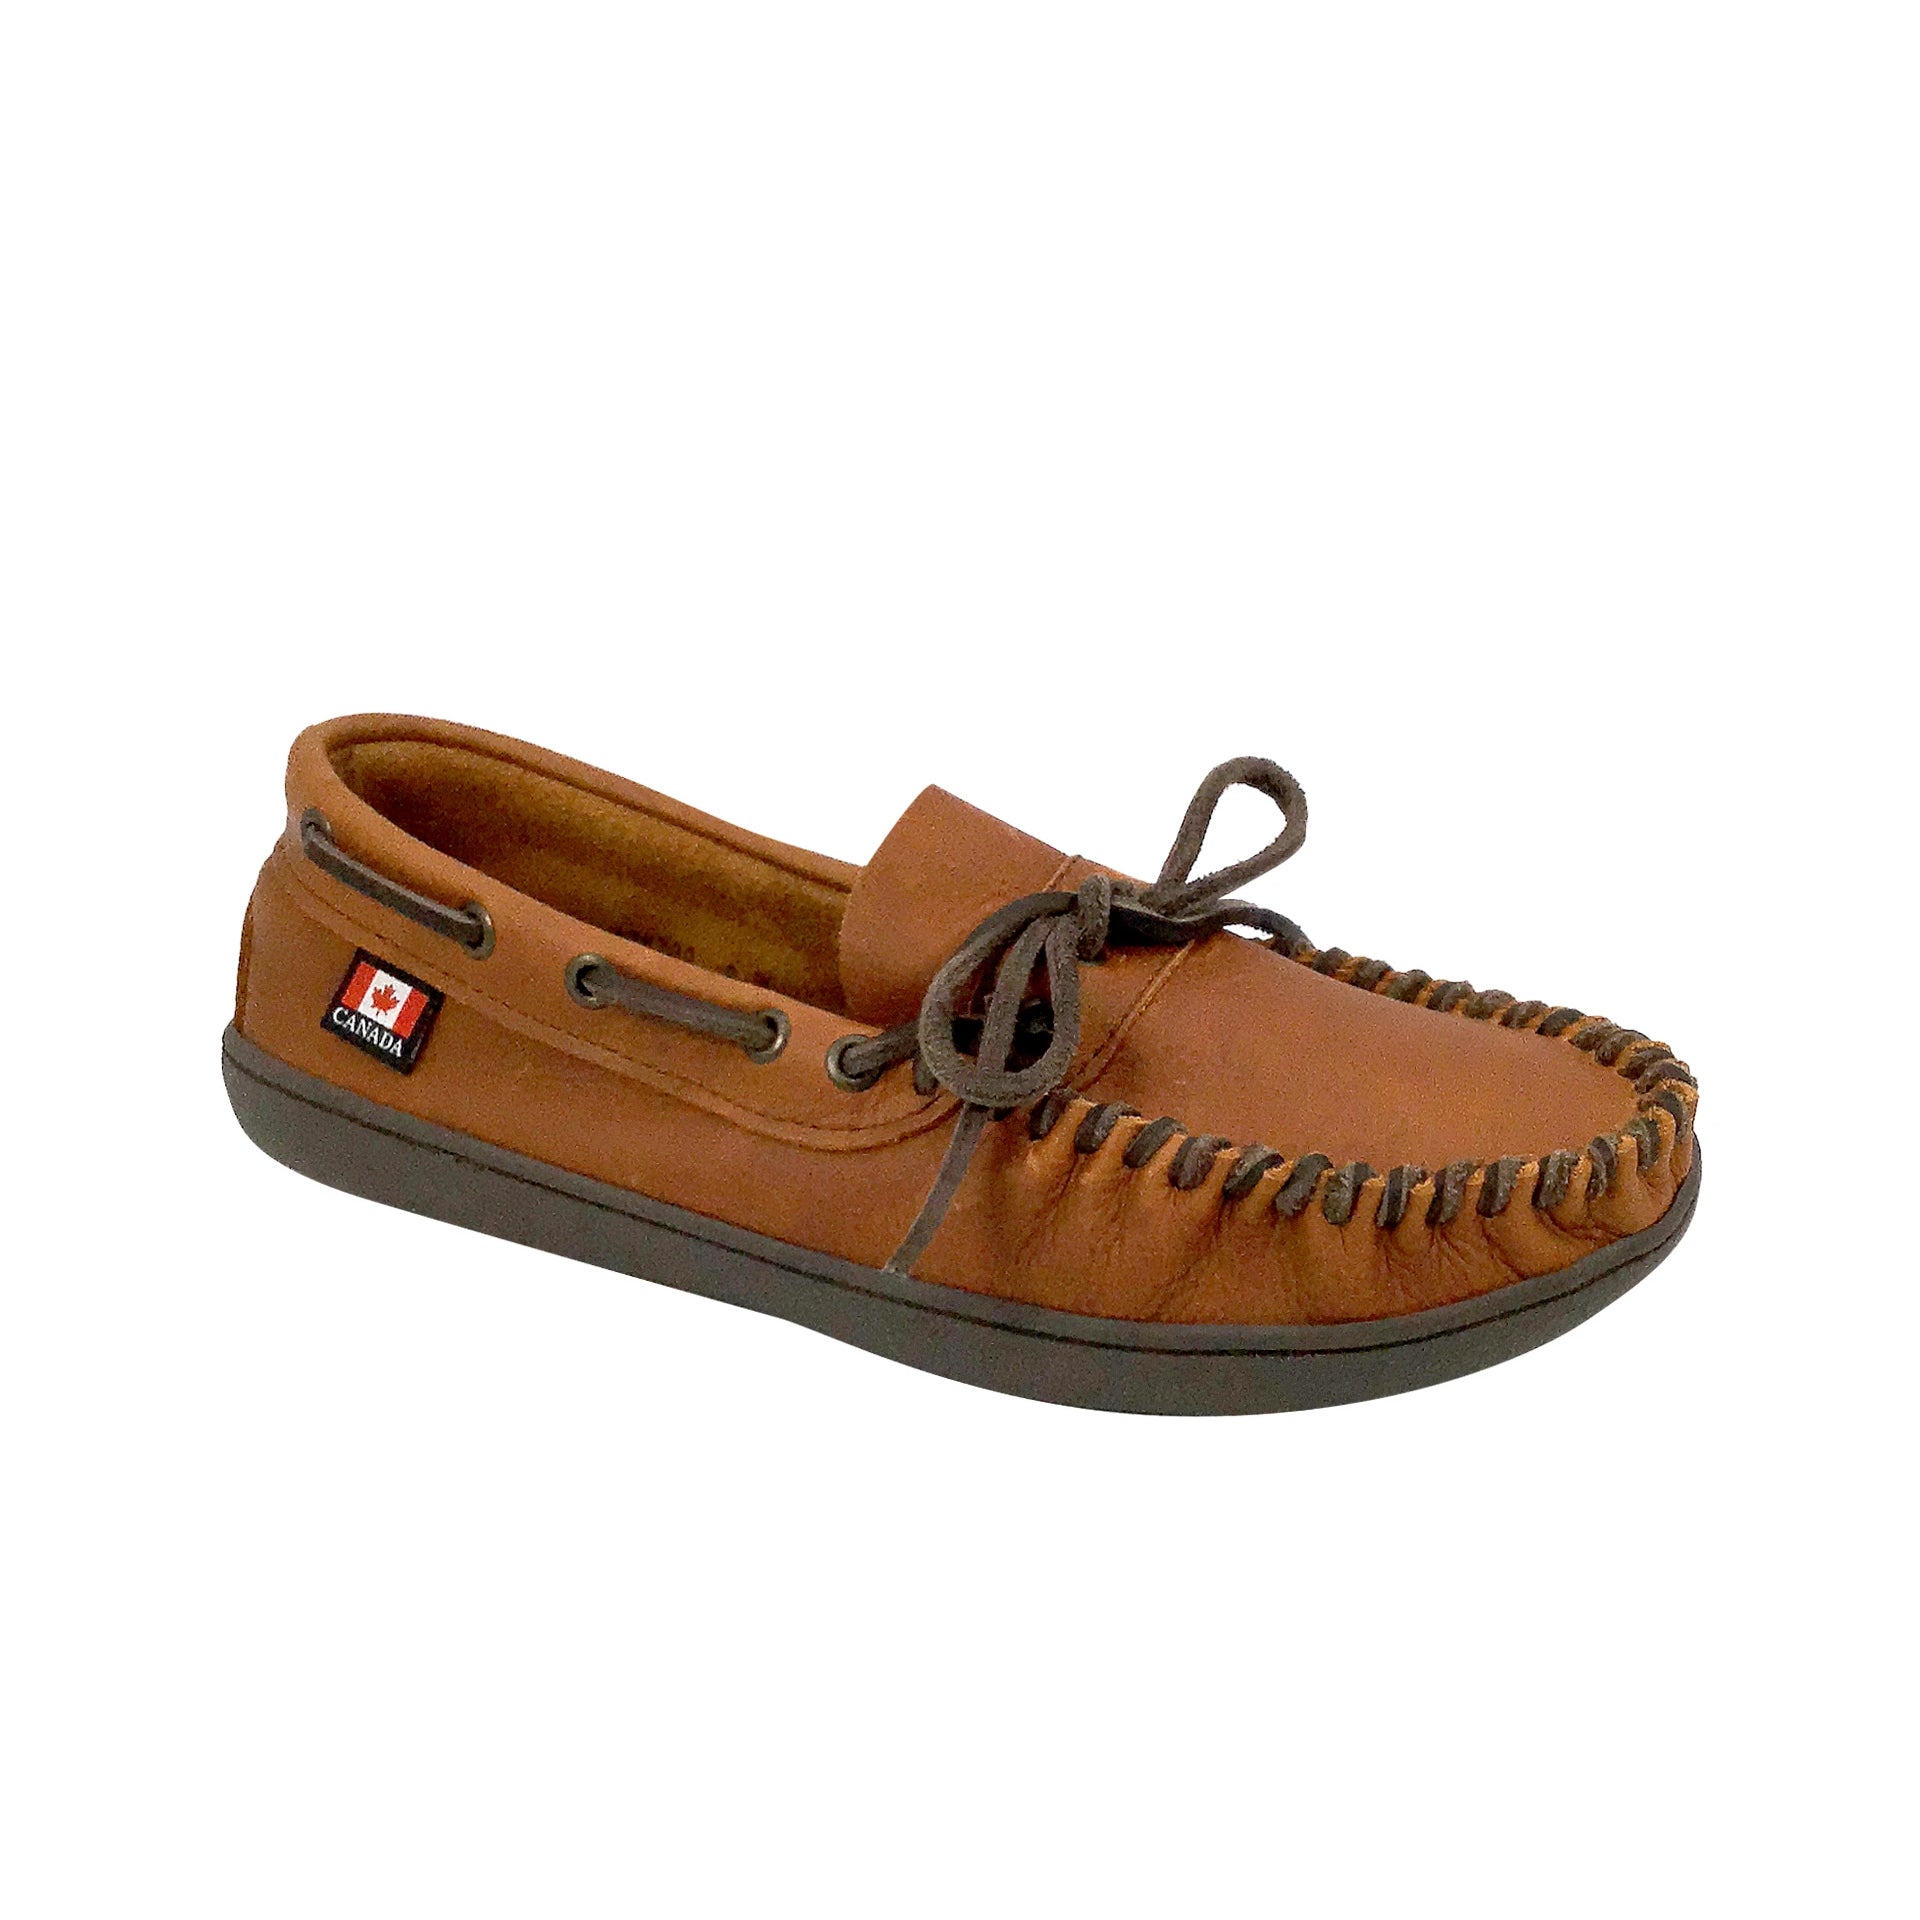 Men's Earthing Moccasin Shoe Wide with Copper Rivet and Rubber Sole